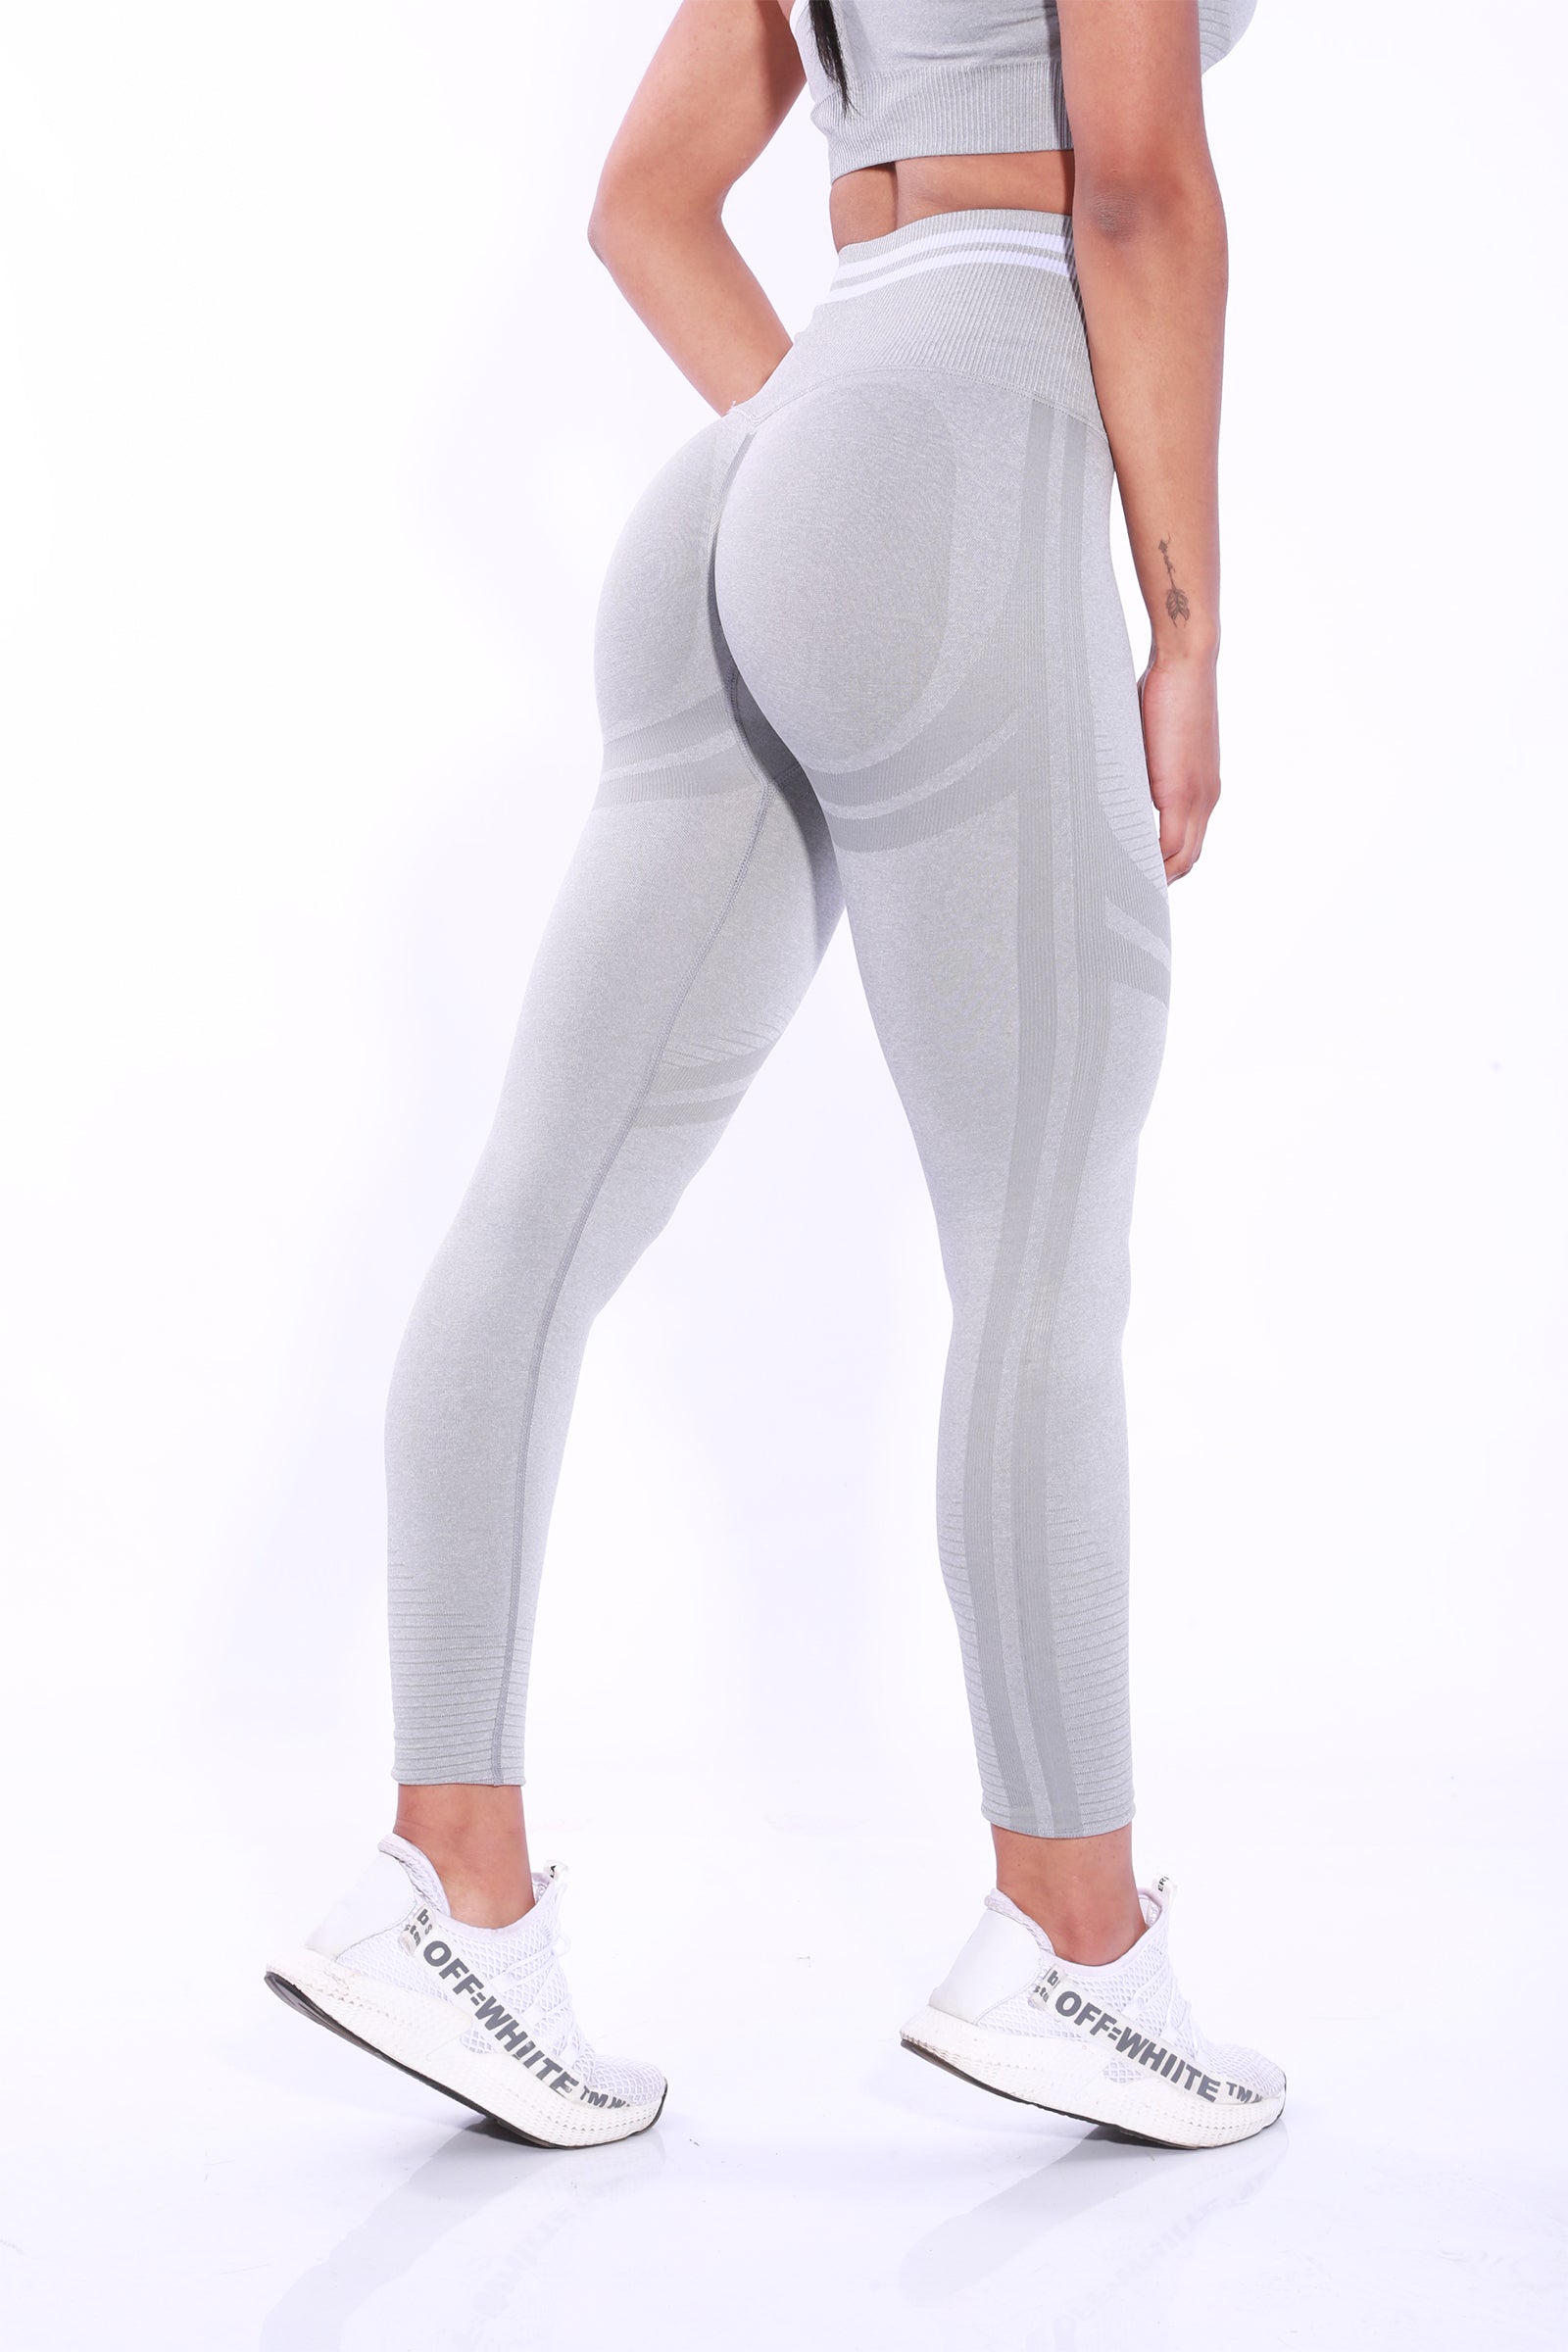 Gymbunny Seamless scrunch leggings have contour shadowing designed to  enhance the beauty of your natural curves. – Shape Wear Shop